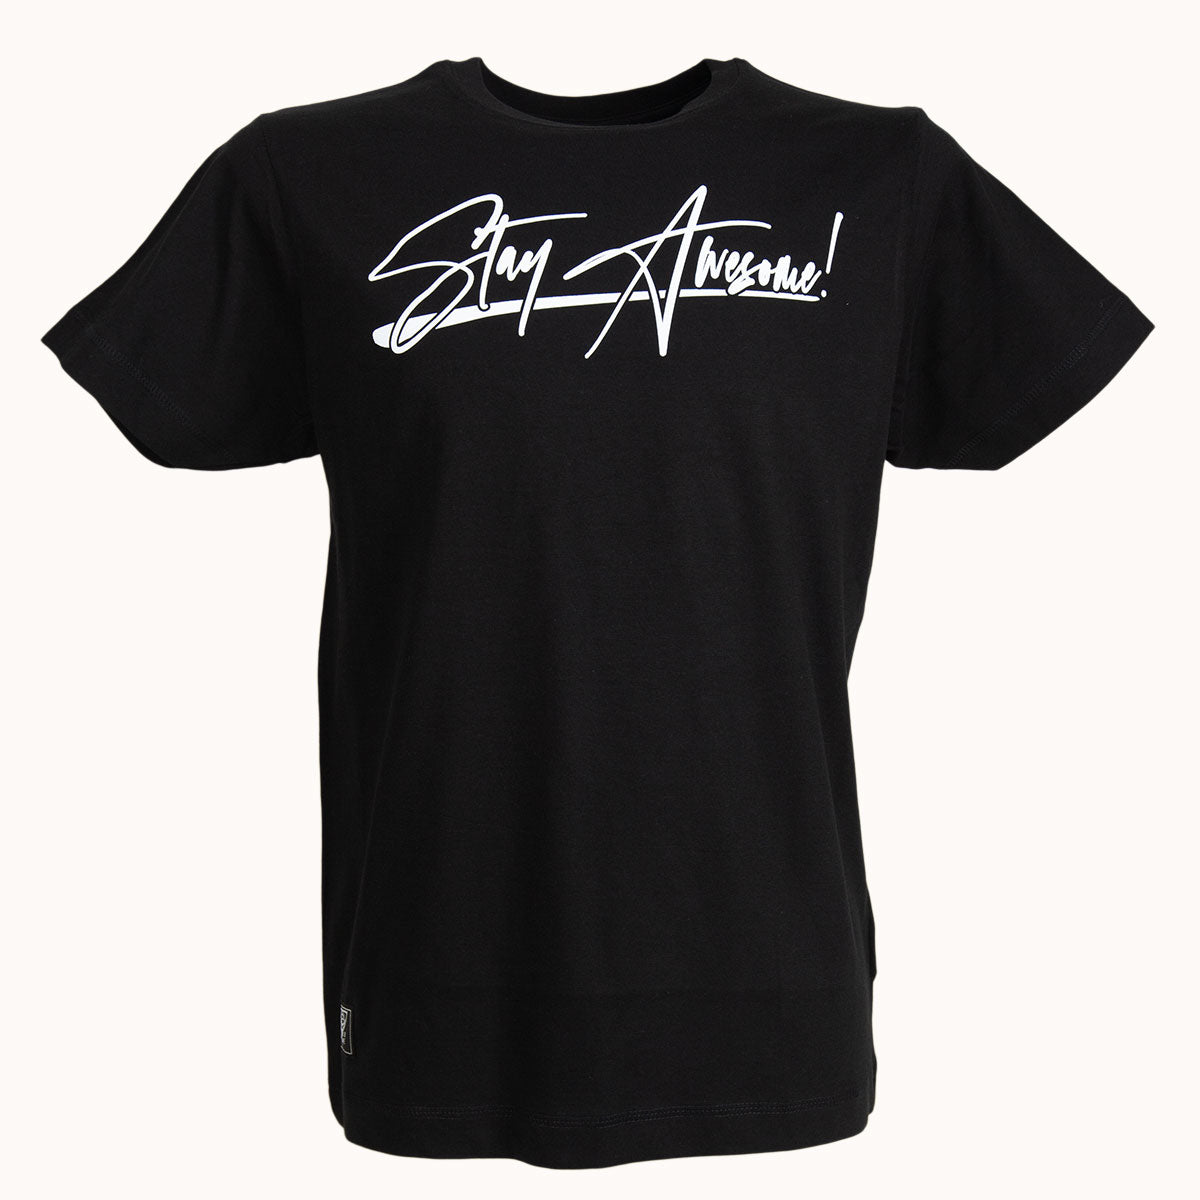 Stay Awesome T-Shirt - B2BA Clothing